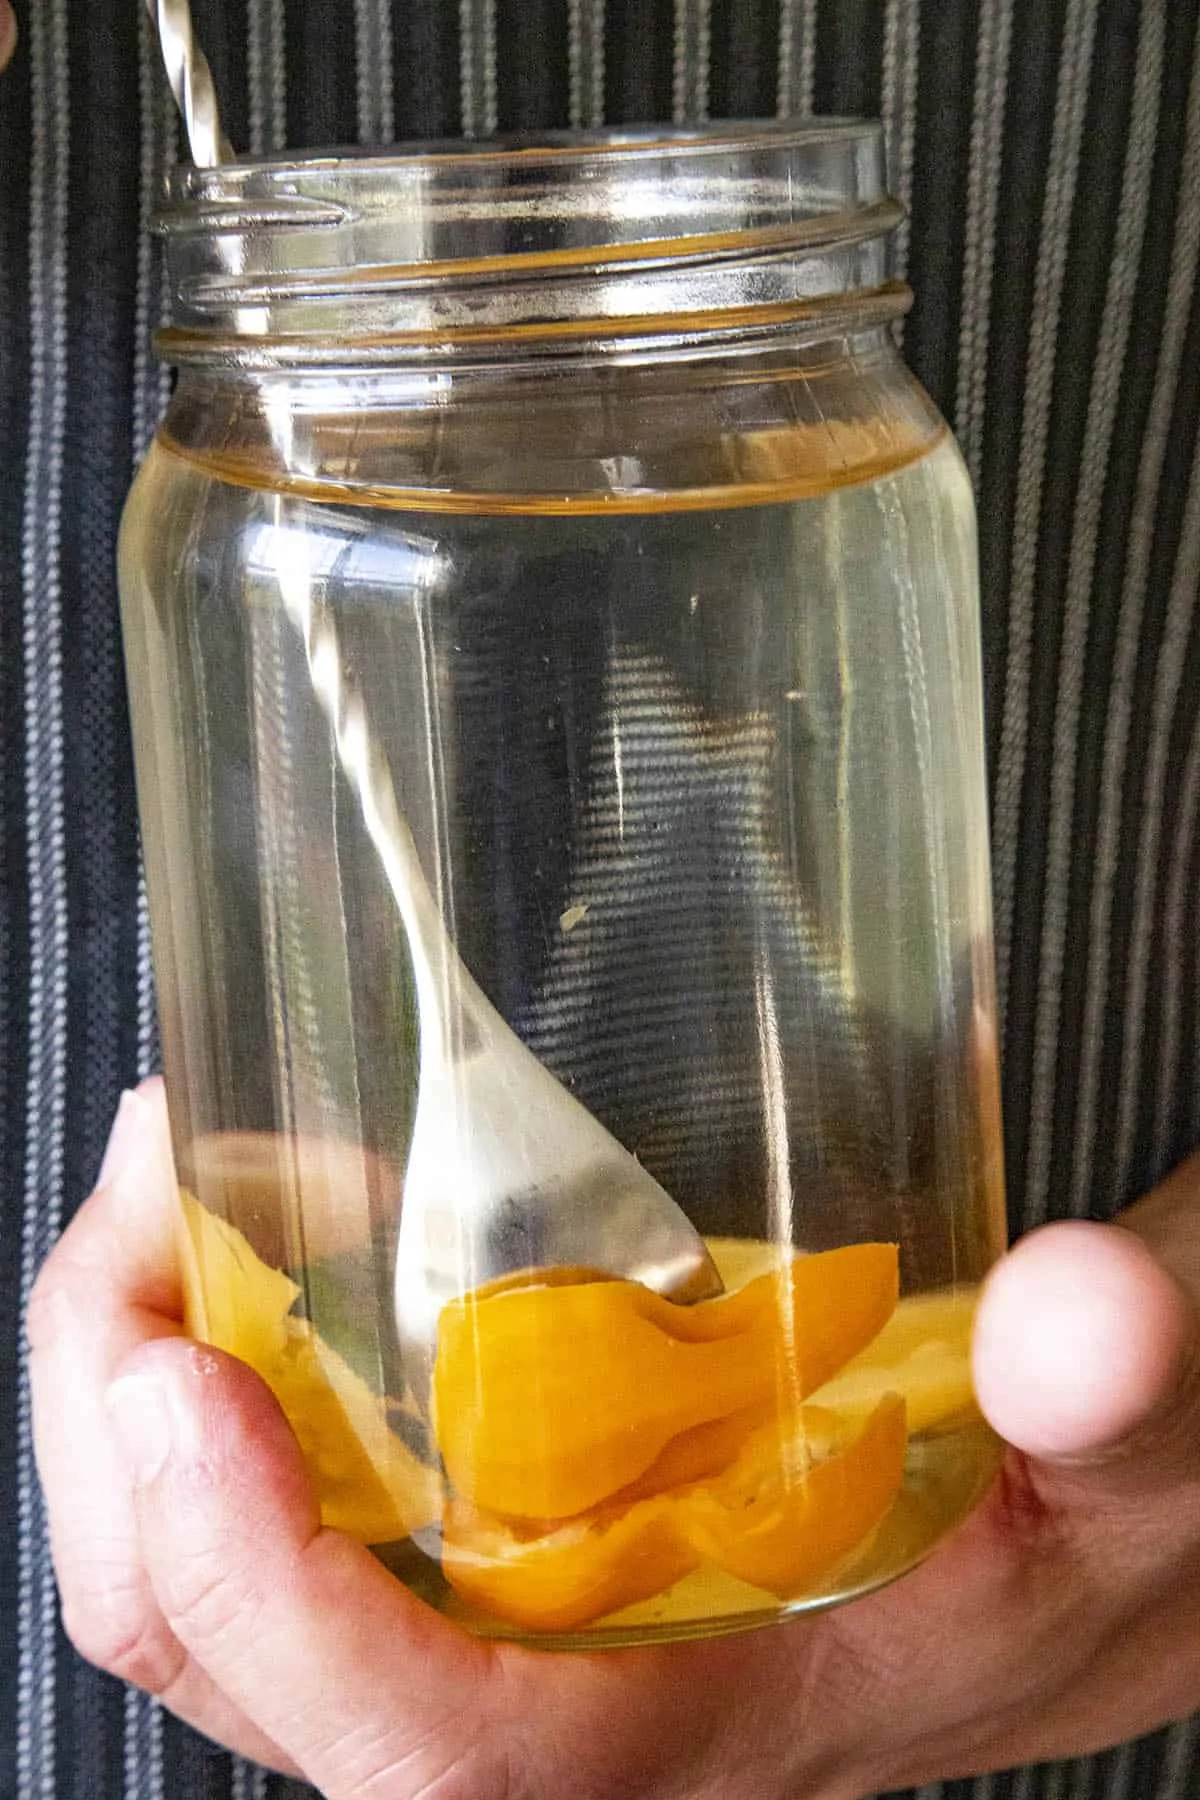 Infusing alcohol with spicy chili peppers in a ball jar